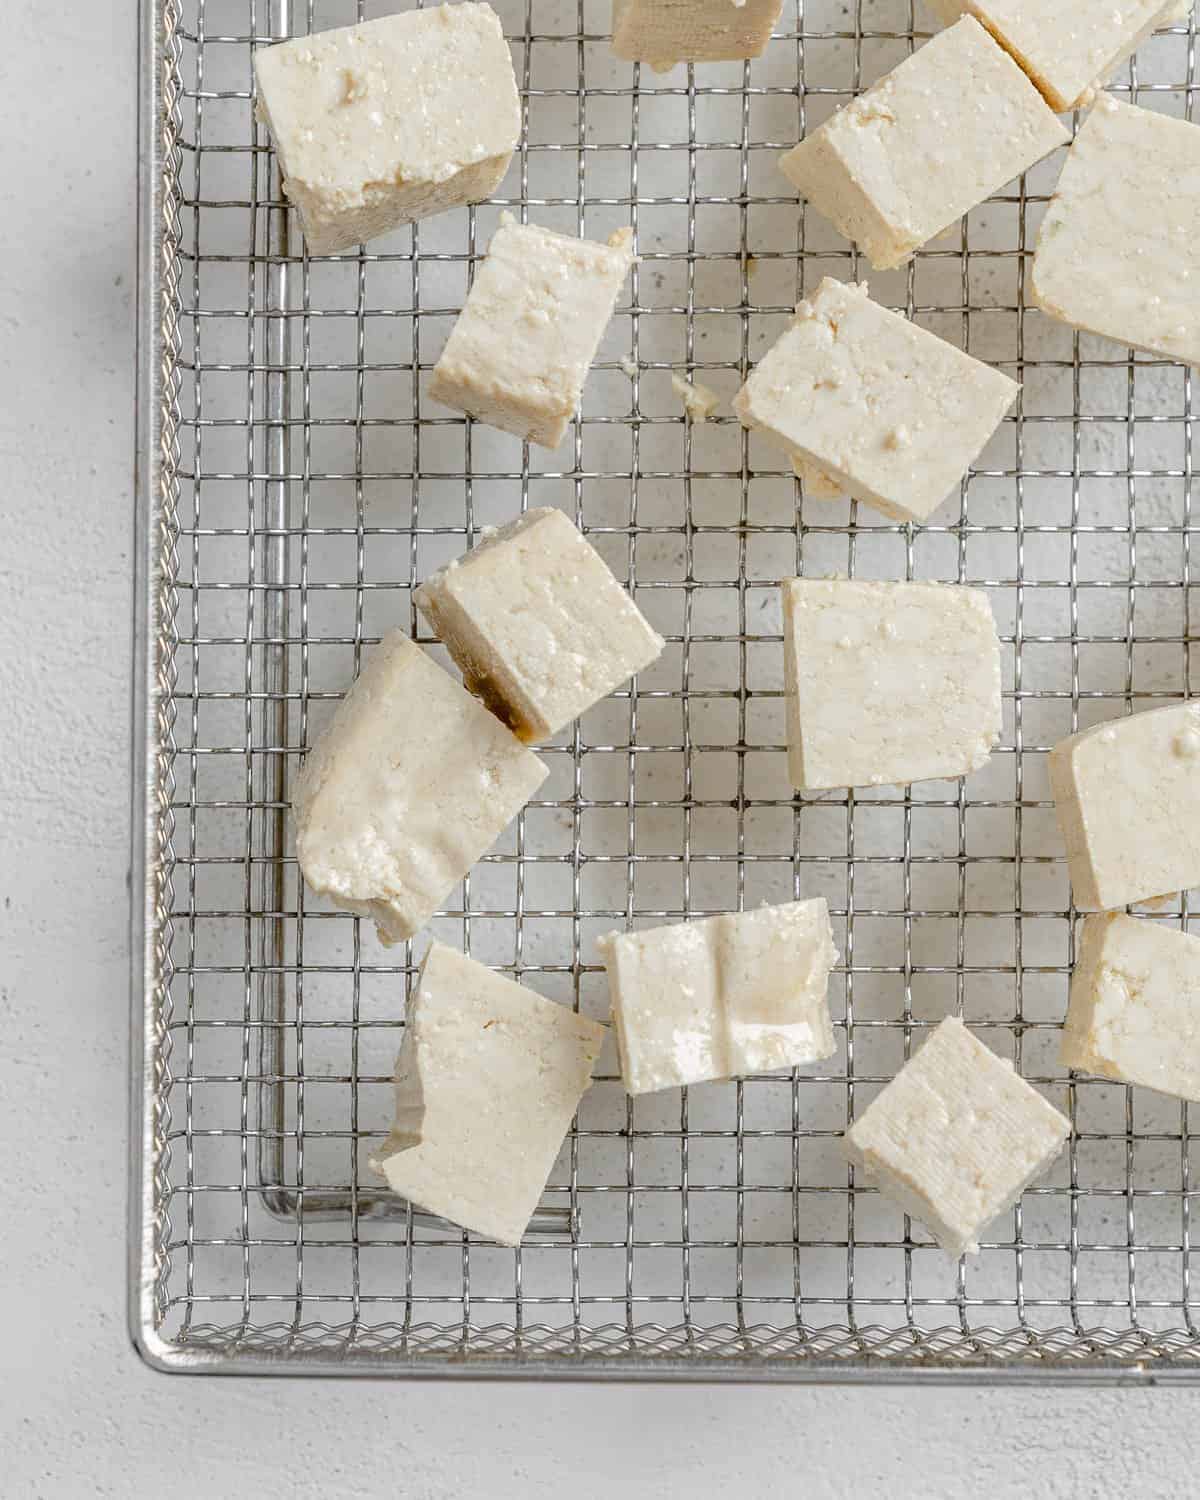 process shot of tofu squares on wire rack against a white surface